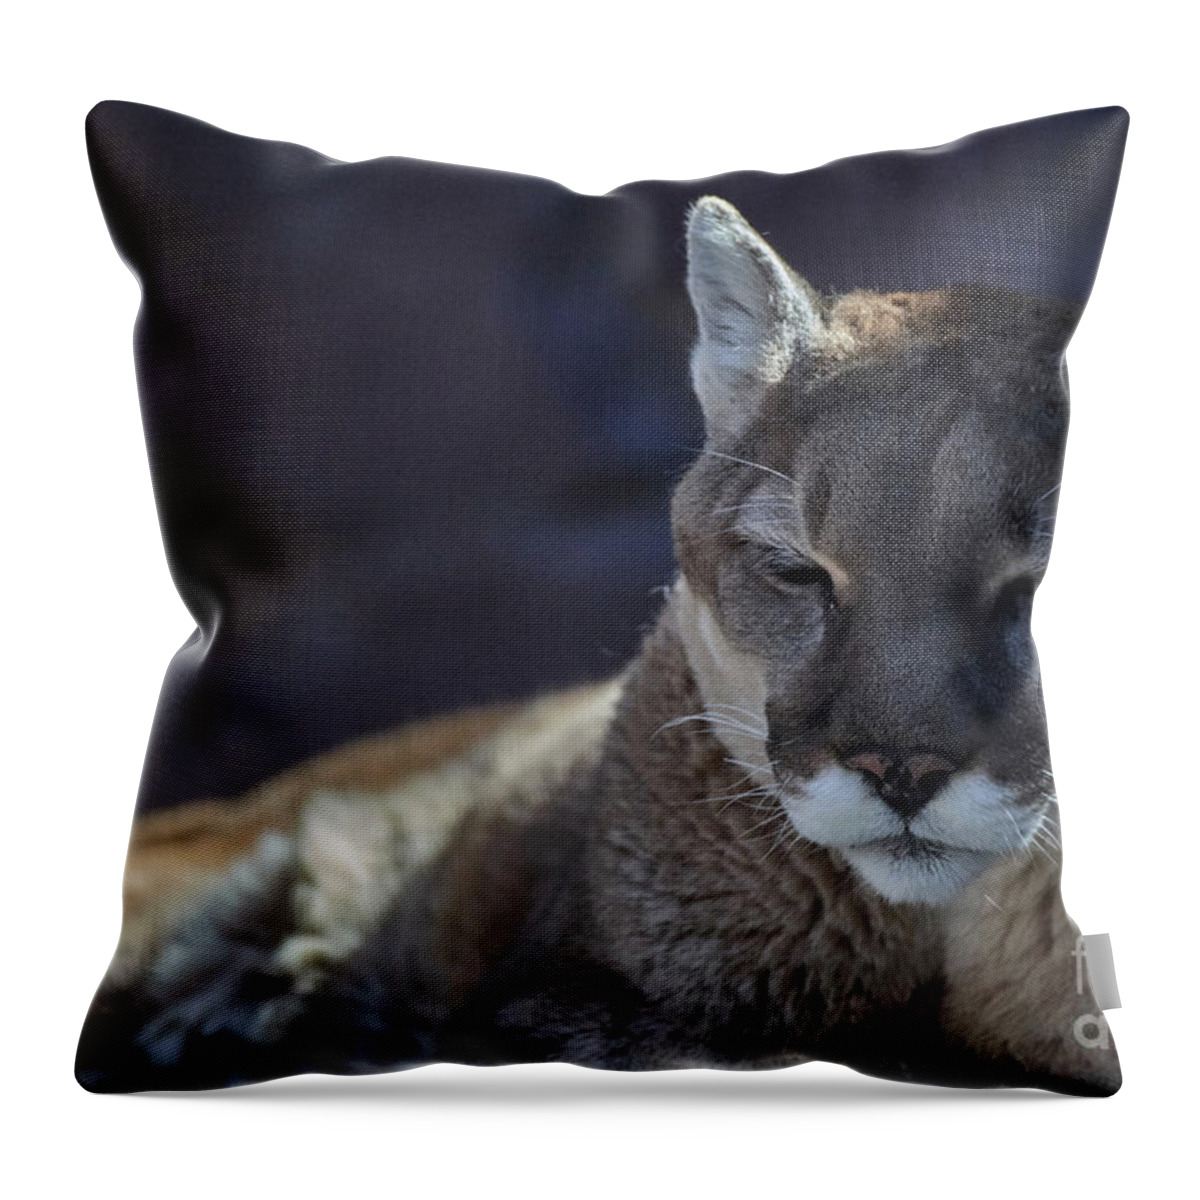 Cat Throw Pillow featuring the photograph Kitty At Rest by Robert WK Clark